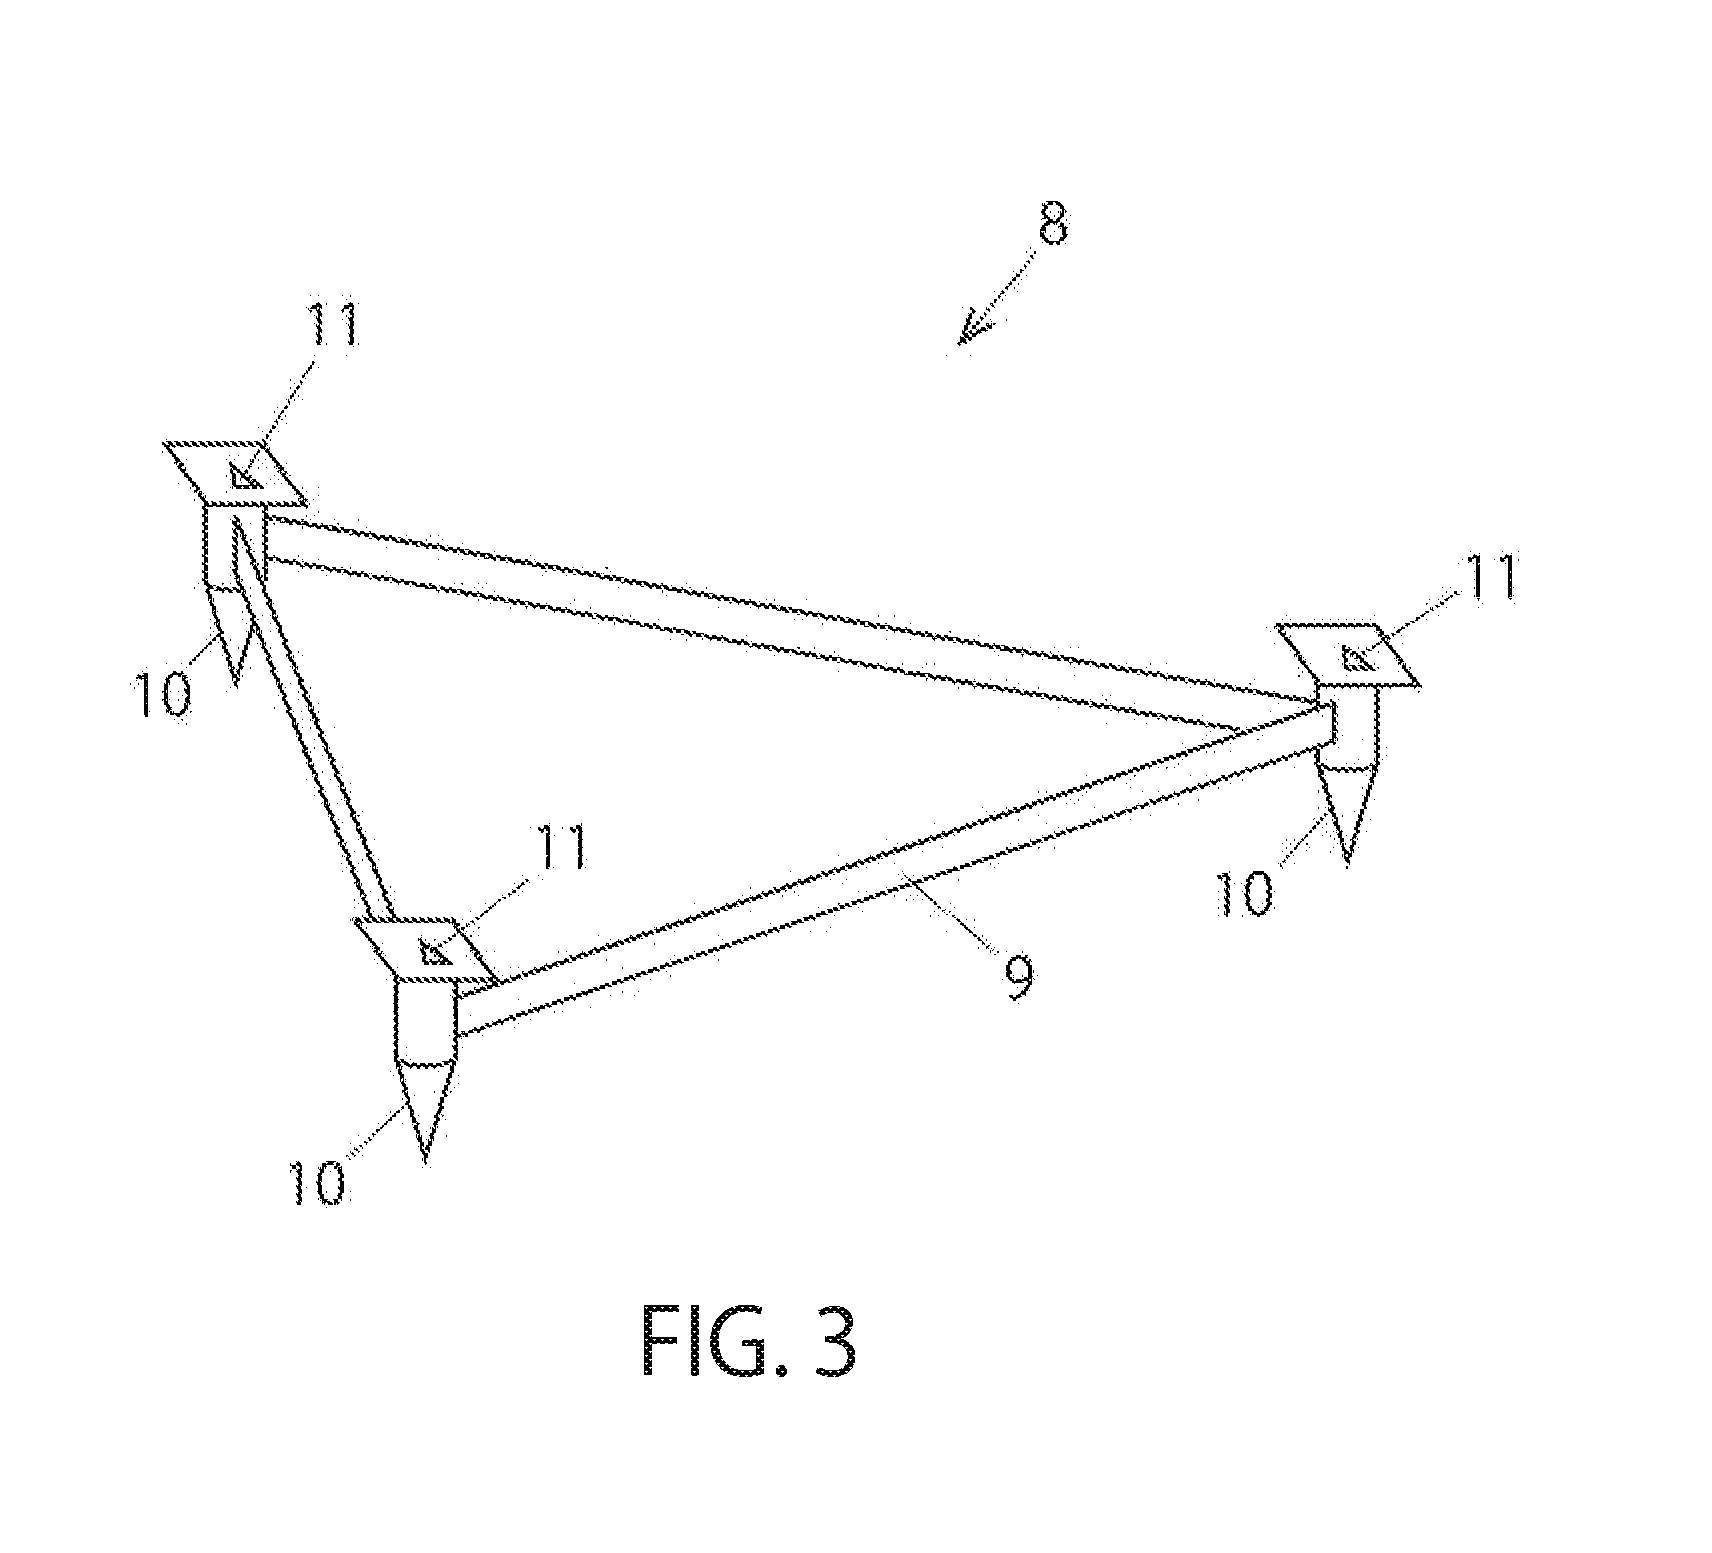 Component assembly work support system and component assembly method